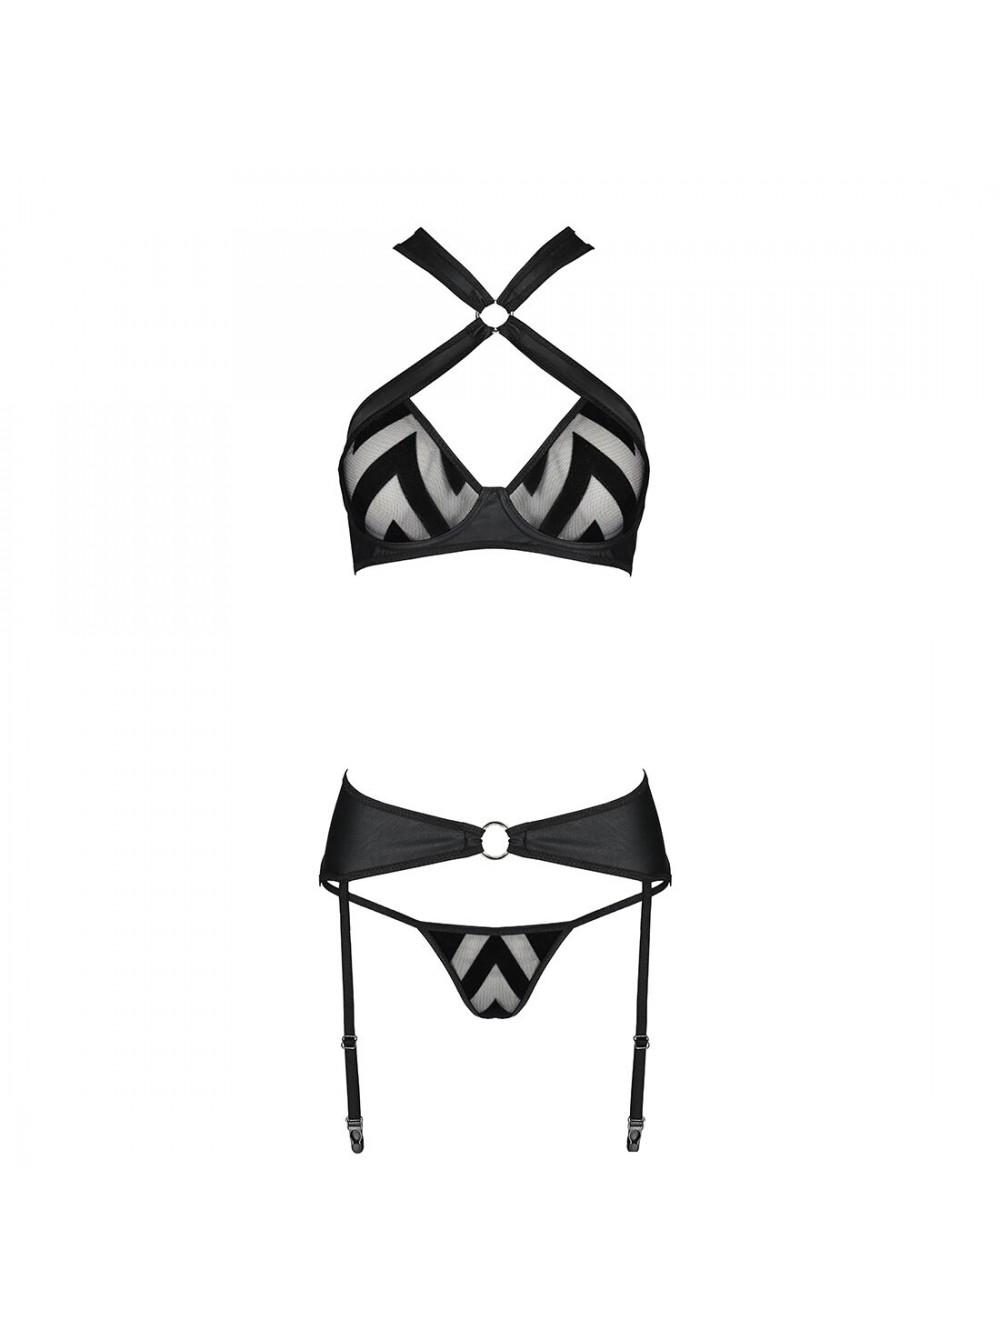 Mesh set with pattern: bra with halter, panties and belts for Hima Set Black  L/XL